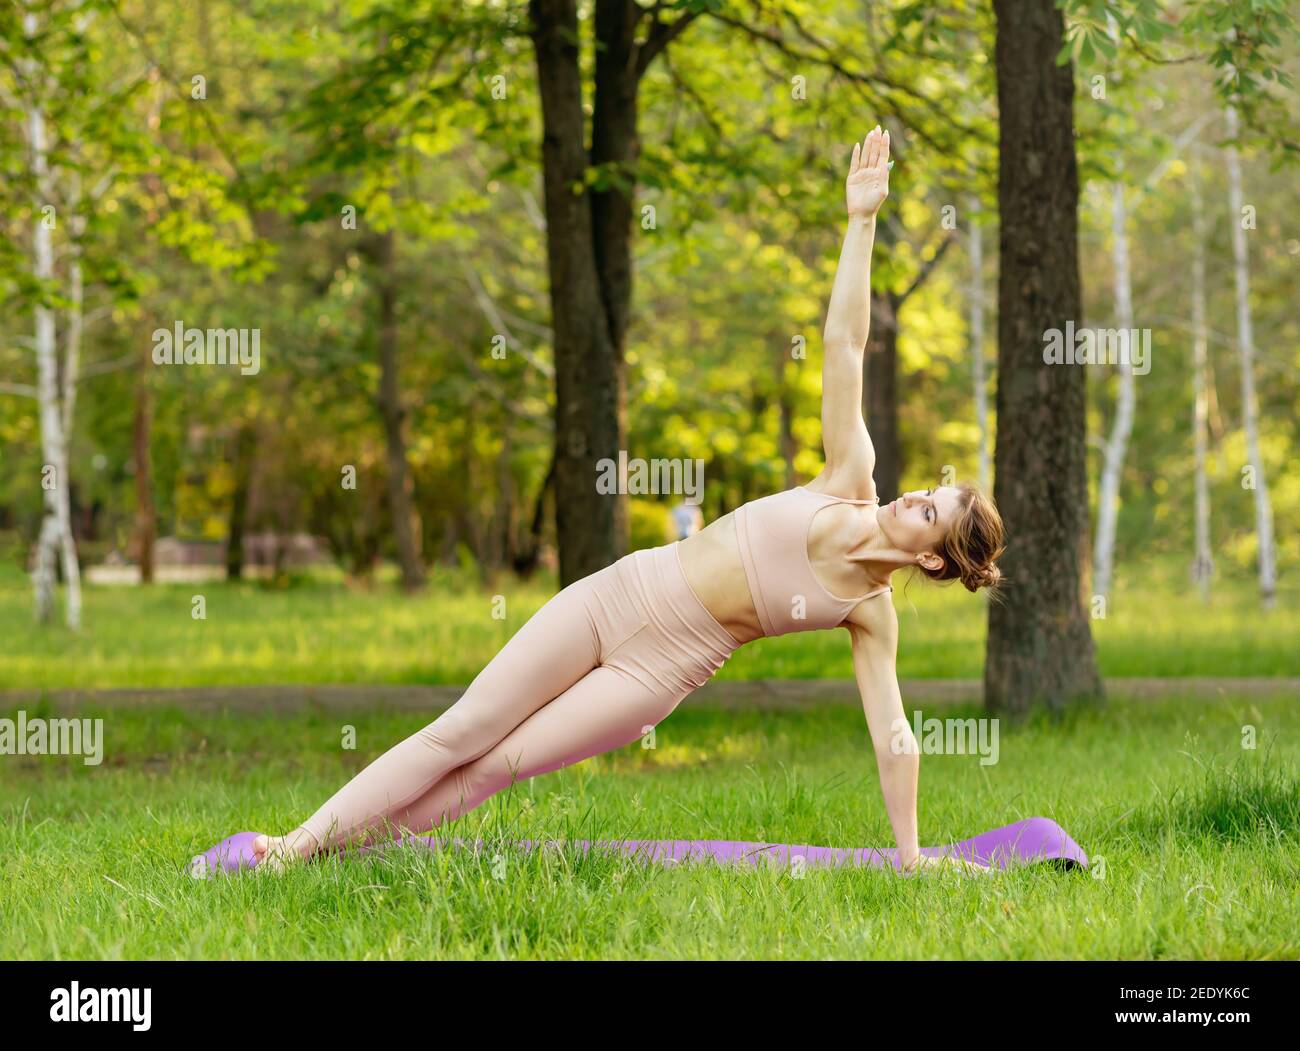 Yoga practice. Tranquility and concentration. Finding inner peace. Stock Photo